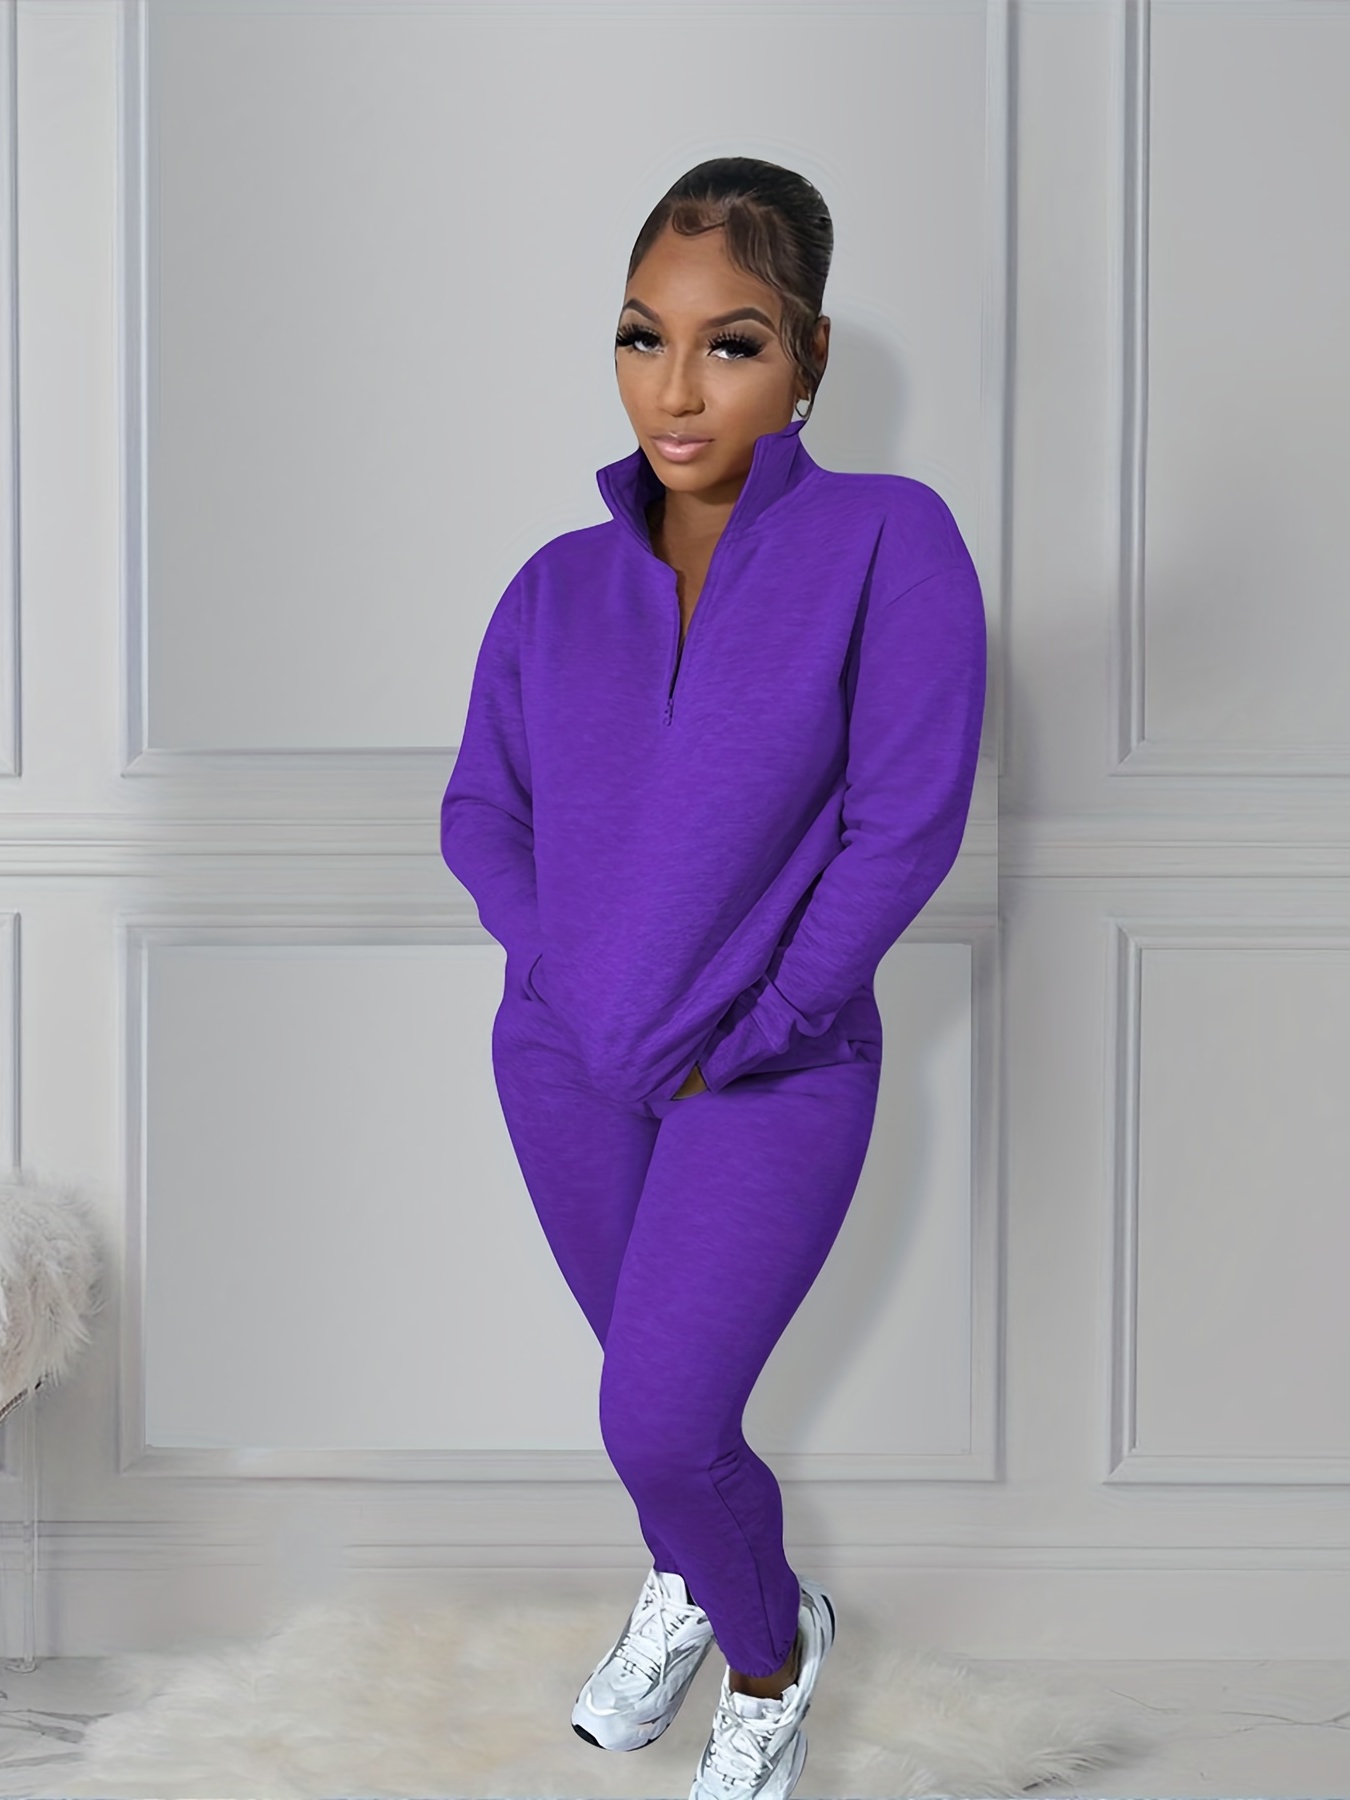 Womens Blue Stripe Two Piece Sweatsuit Romper Set With Sweat Suit And Cold  Shoulder Zipper Sexy And Elegant Tracksuit For Sport And Jogging From  Clothes0708, $10.46